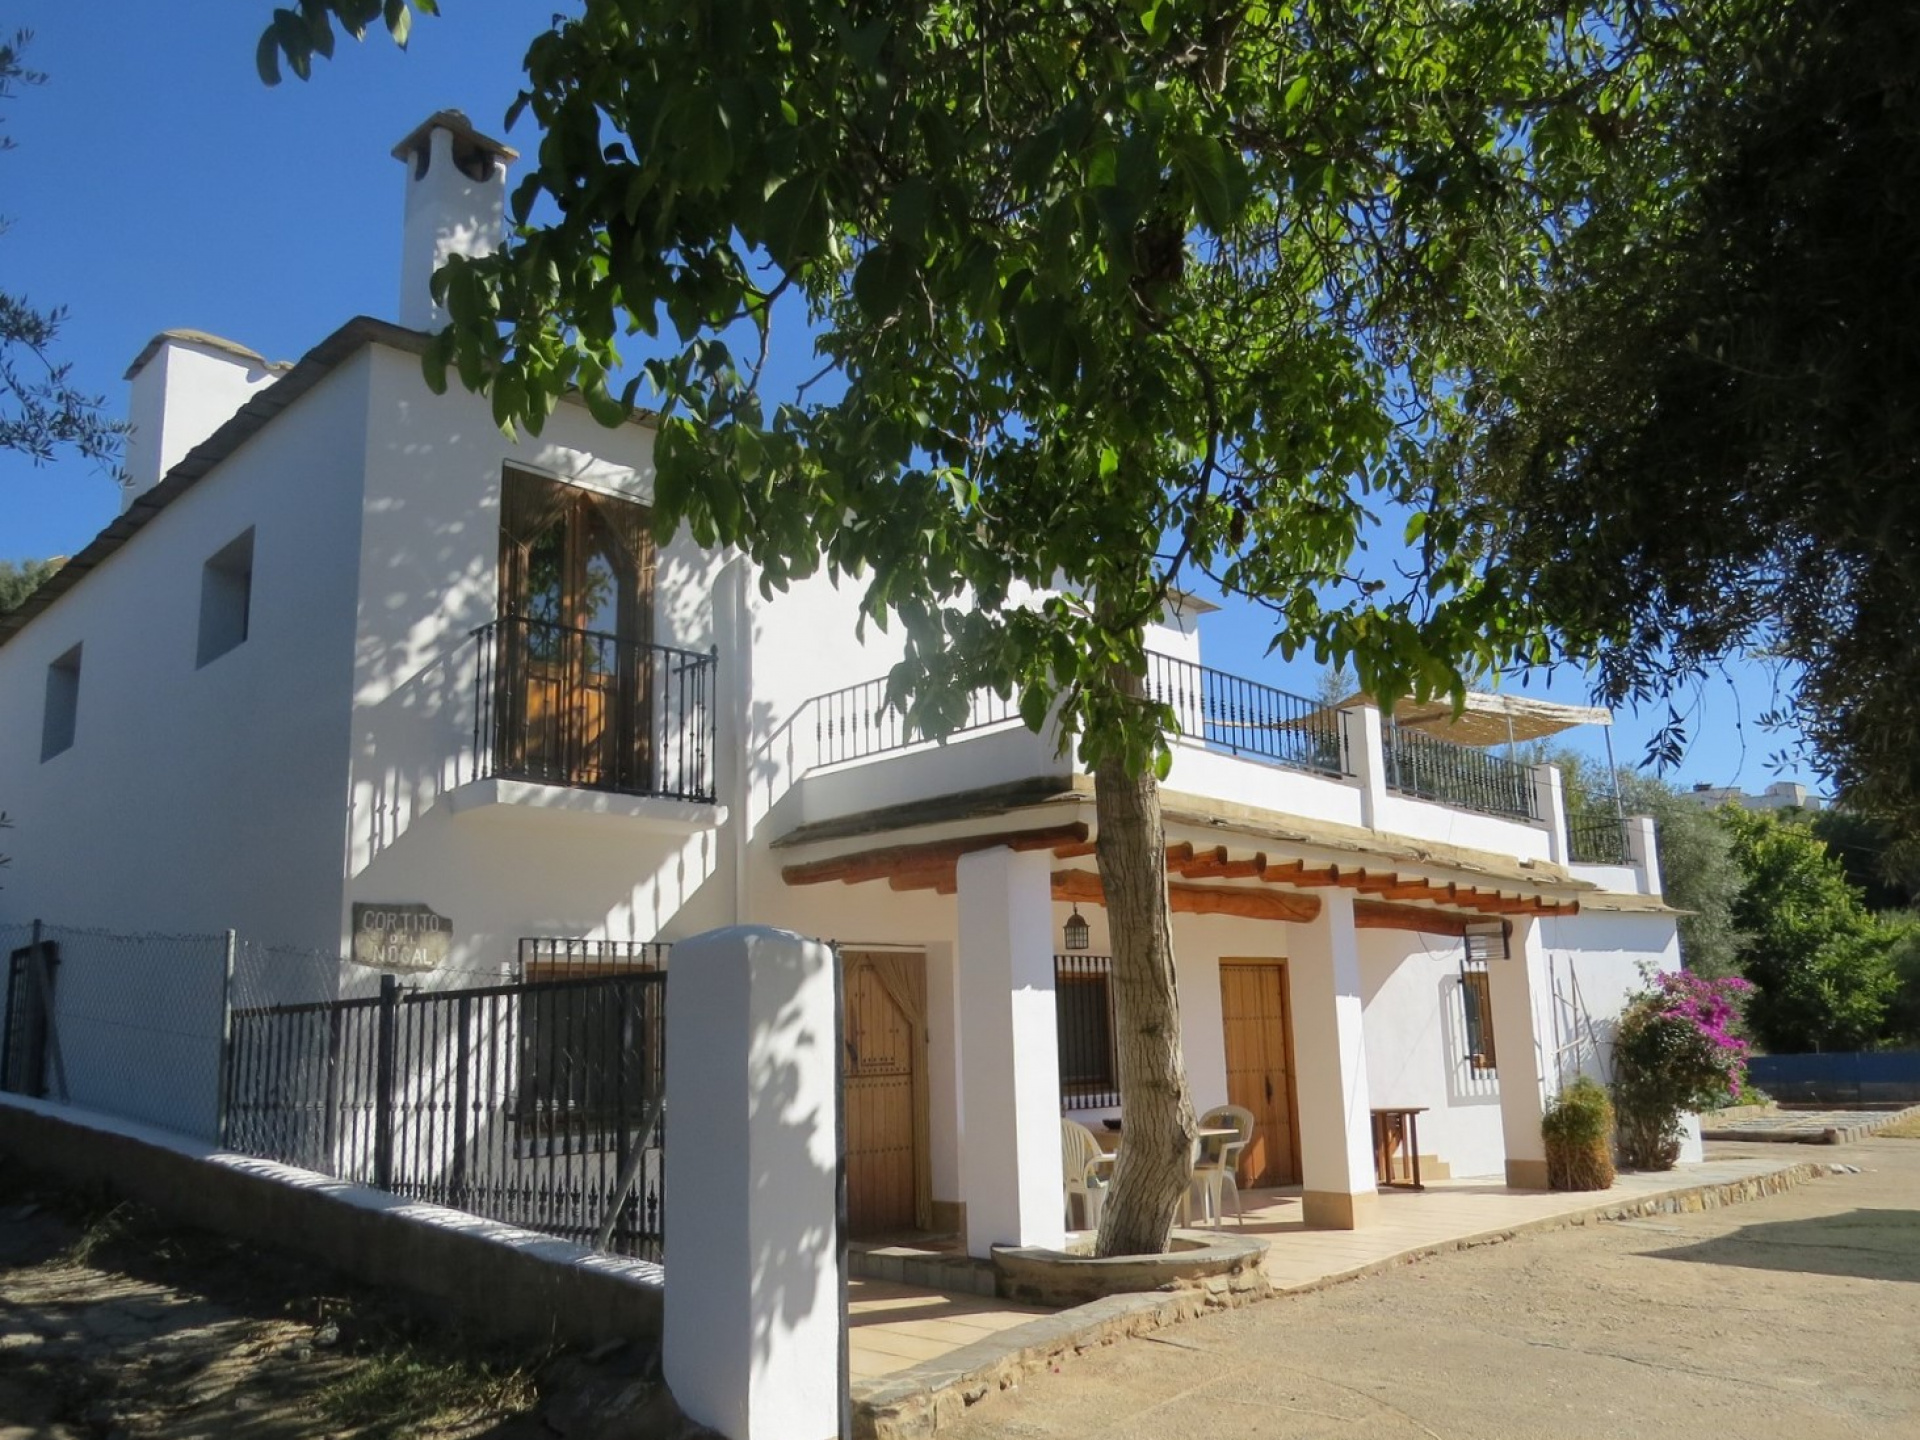 South Facing Large Cortijo very close to the village with land